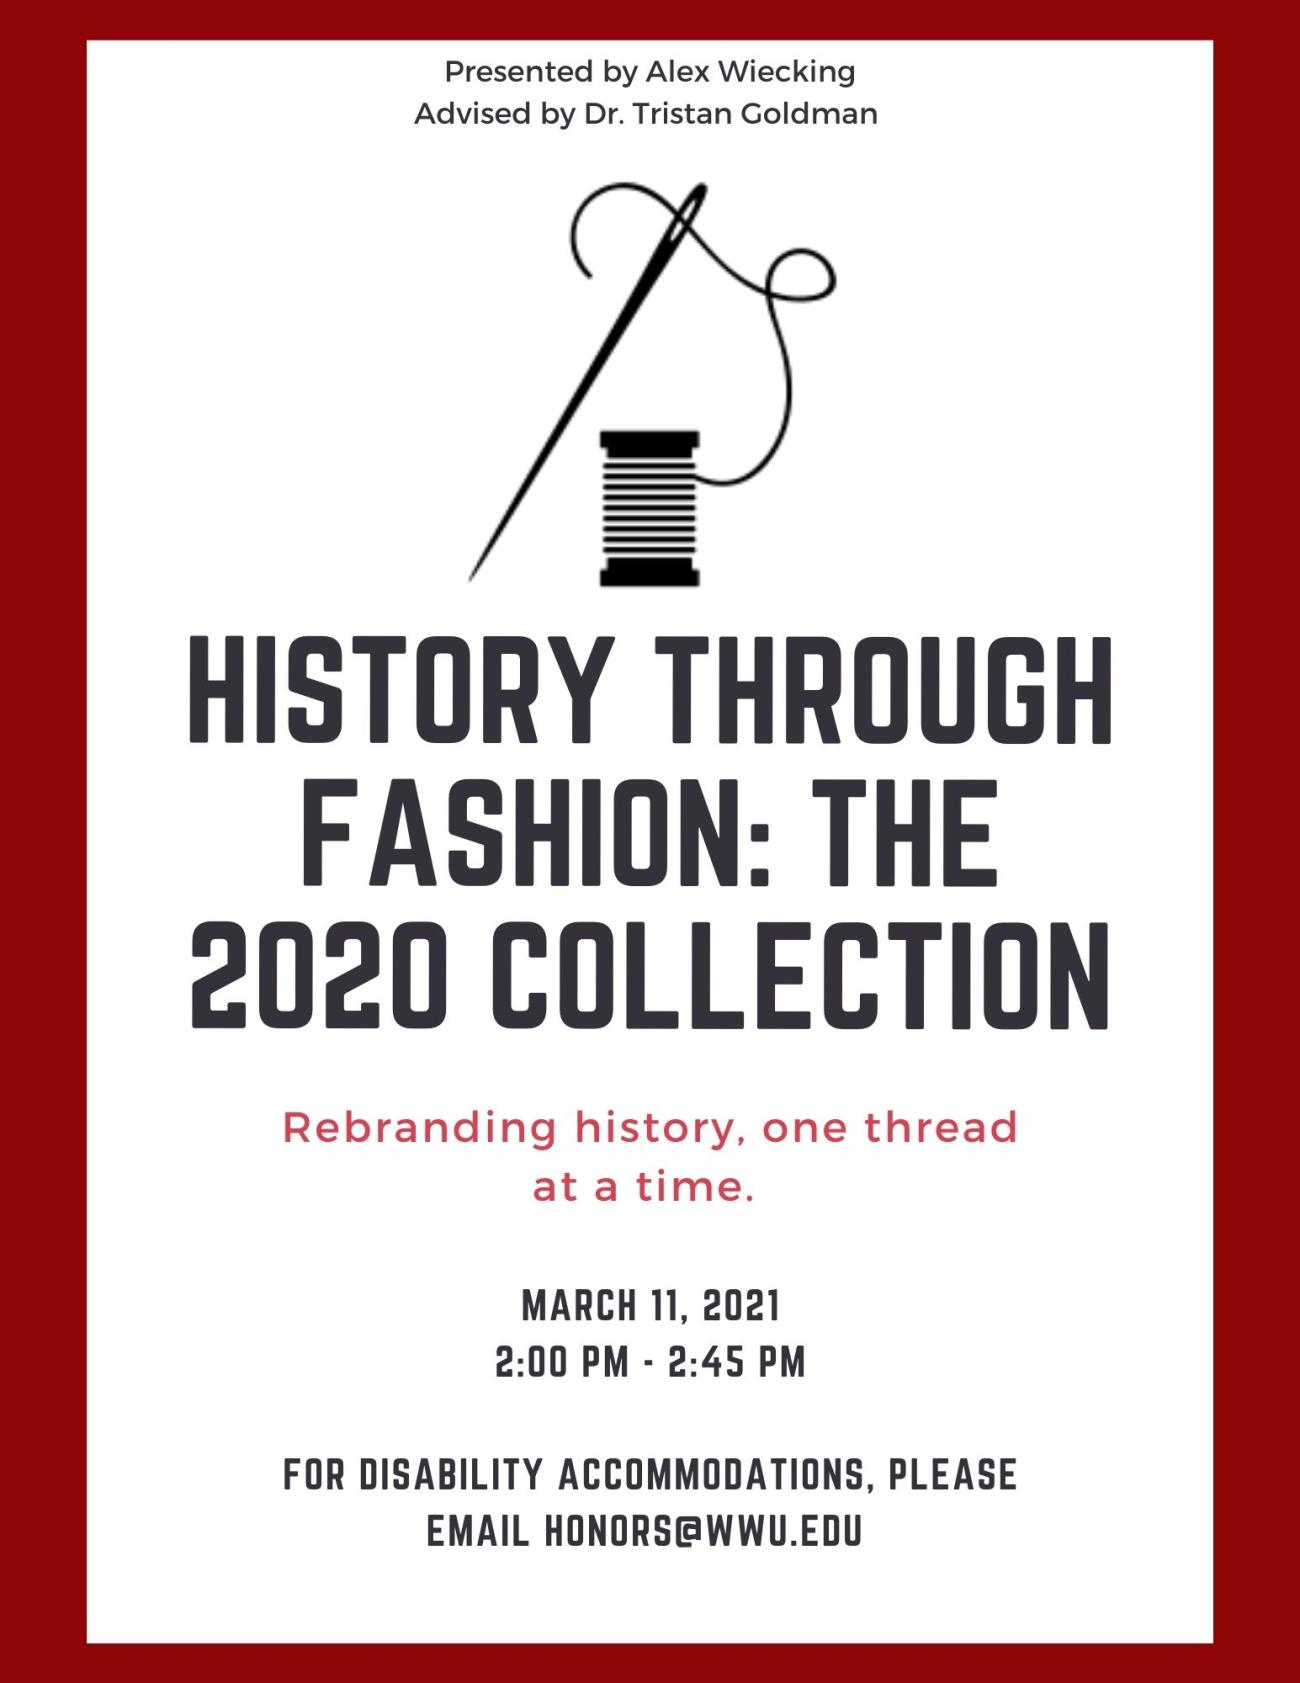 Text reads: "Presented by Alex Wiecking. Advised by Dr. Tristan Goldman. History Through Fashion: The 2020 Collection. Rebranding History, one thread at a time. March 11, 2021. 2:00 pm - 2:45 pm. For disability accommodations, please email honors@wwu.edu". The background is white with a red border and one graphic of an embroidery needle attached to a spool of black thread.